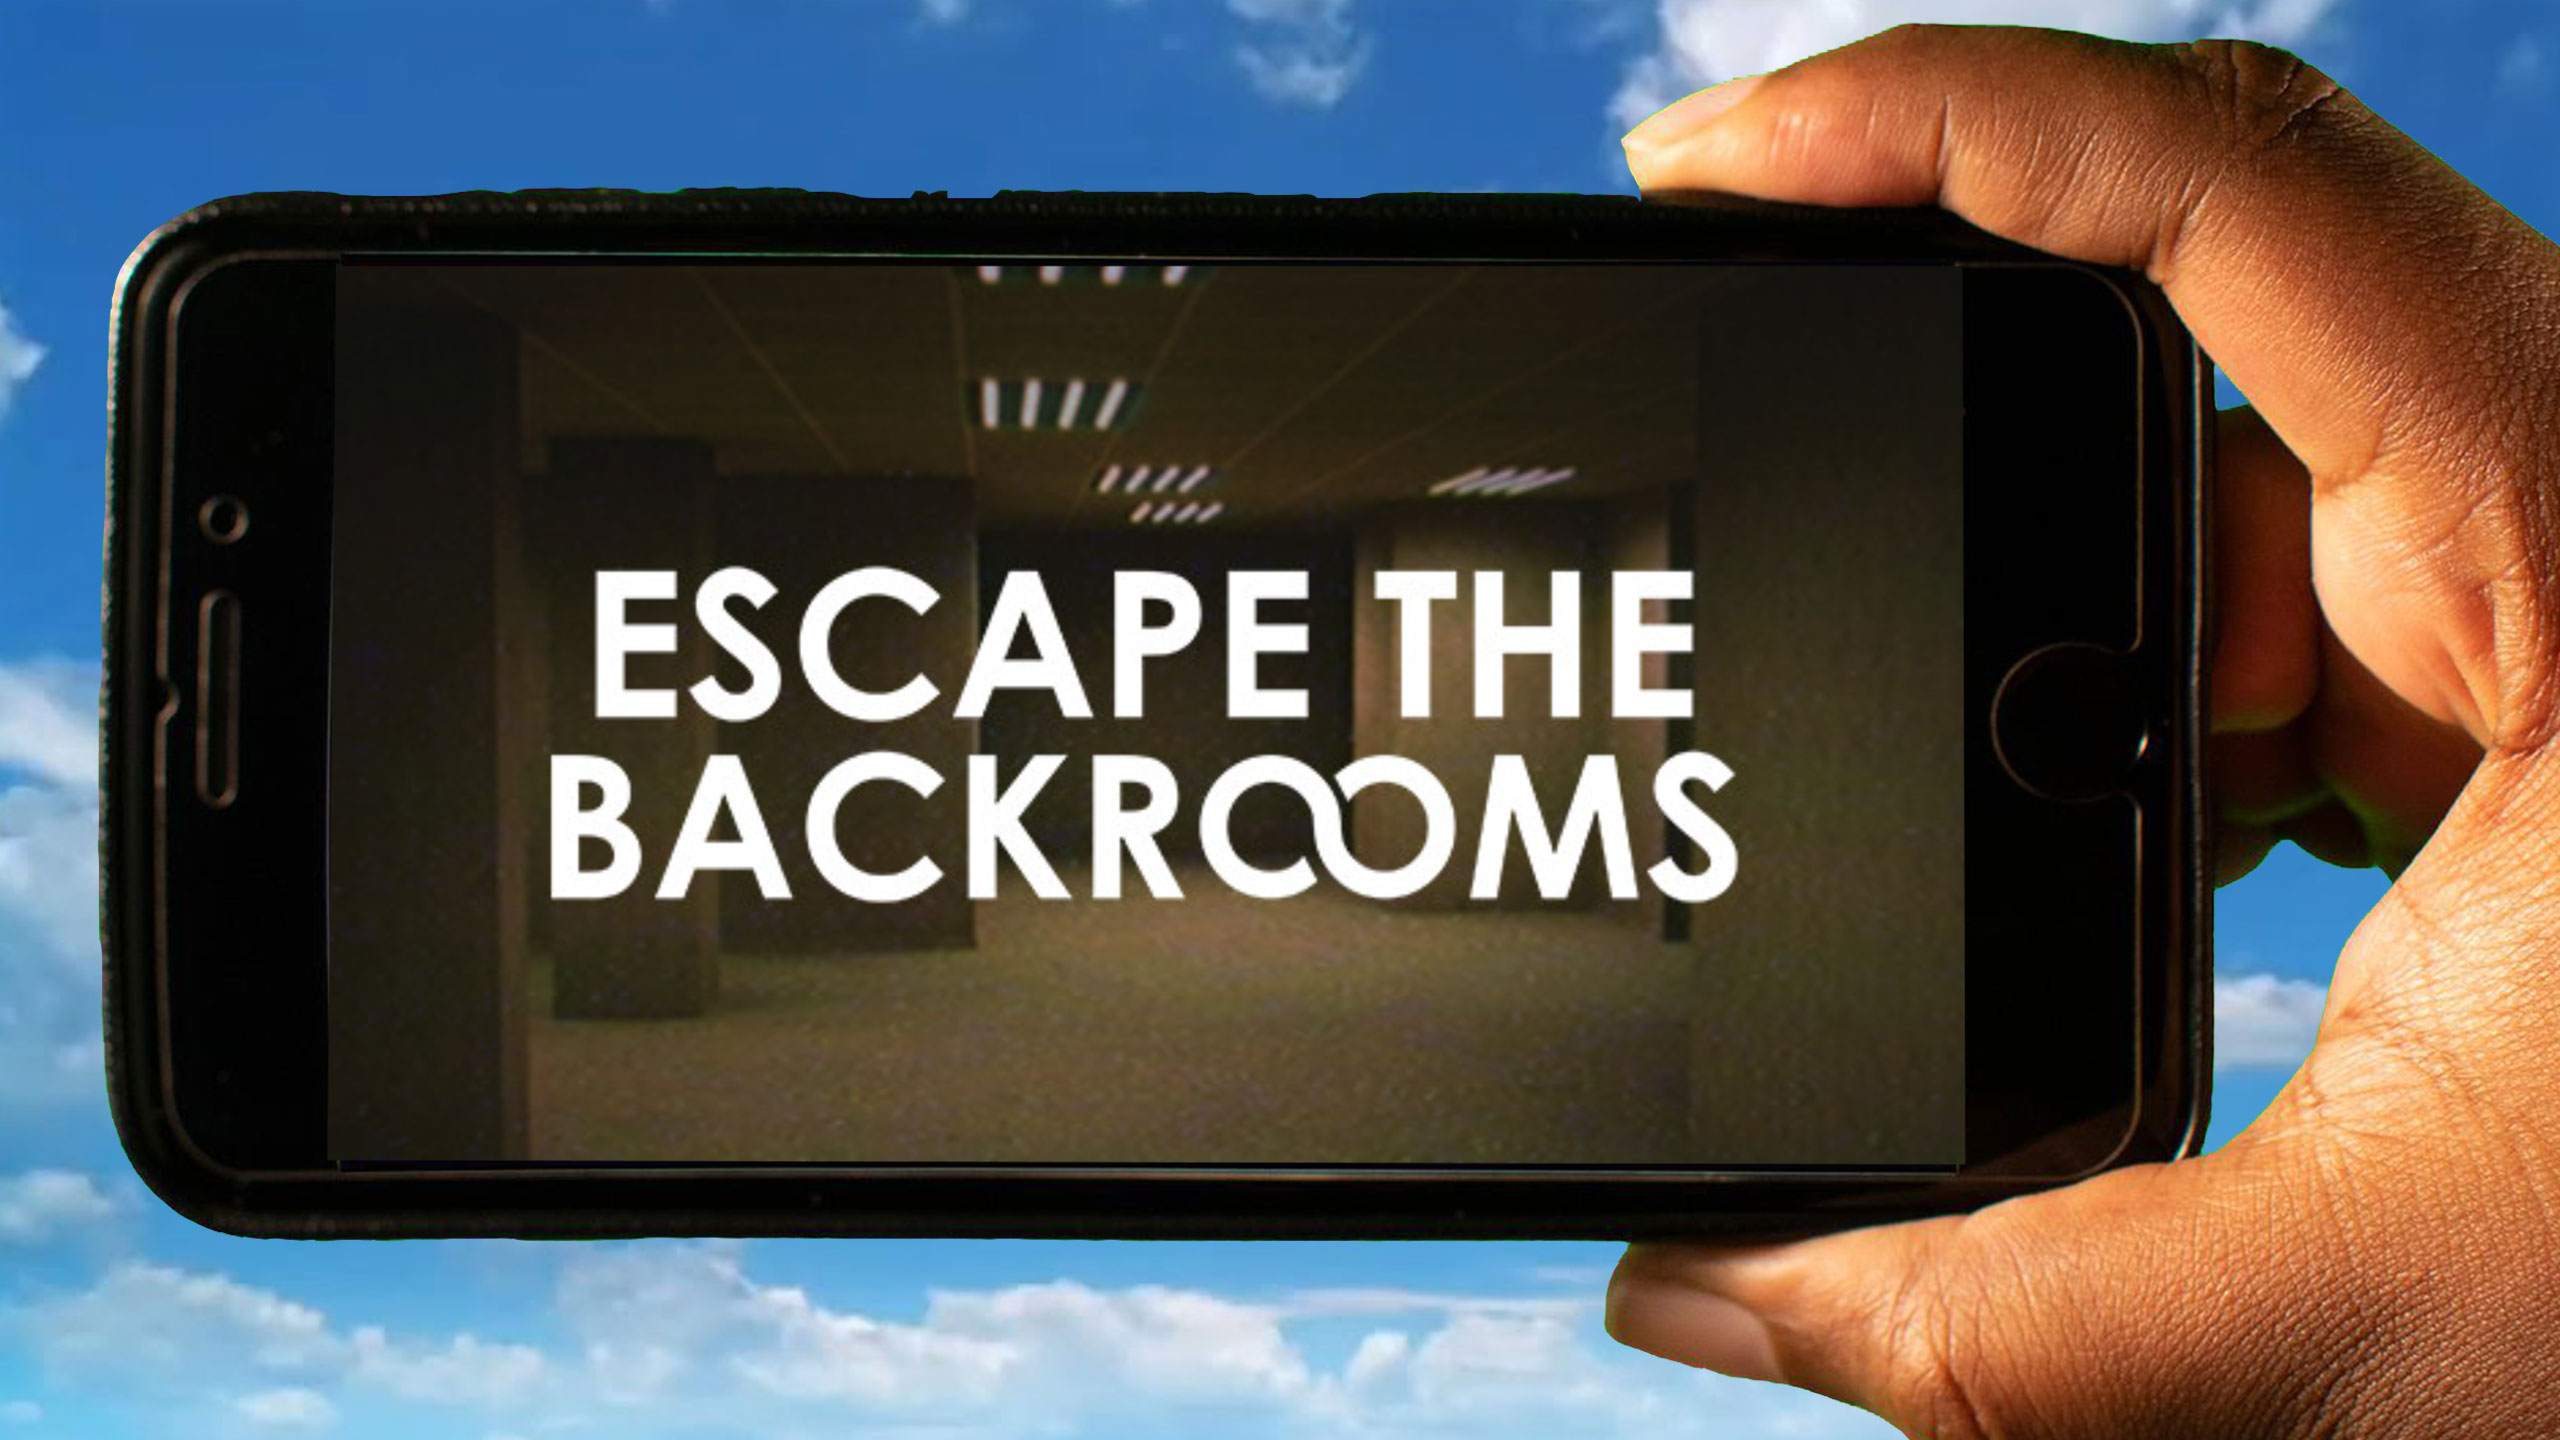 Escape The Backrooms Mobile (UE4) New Update Android & iOS Beta Gameplay